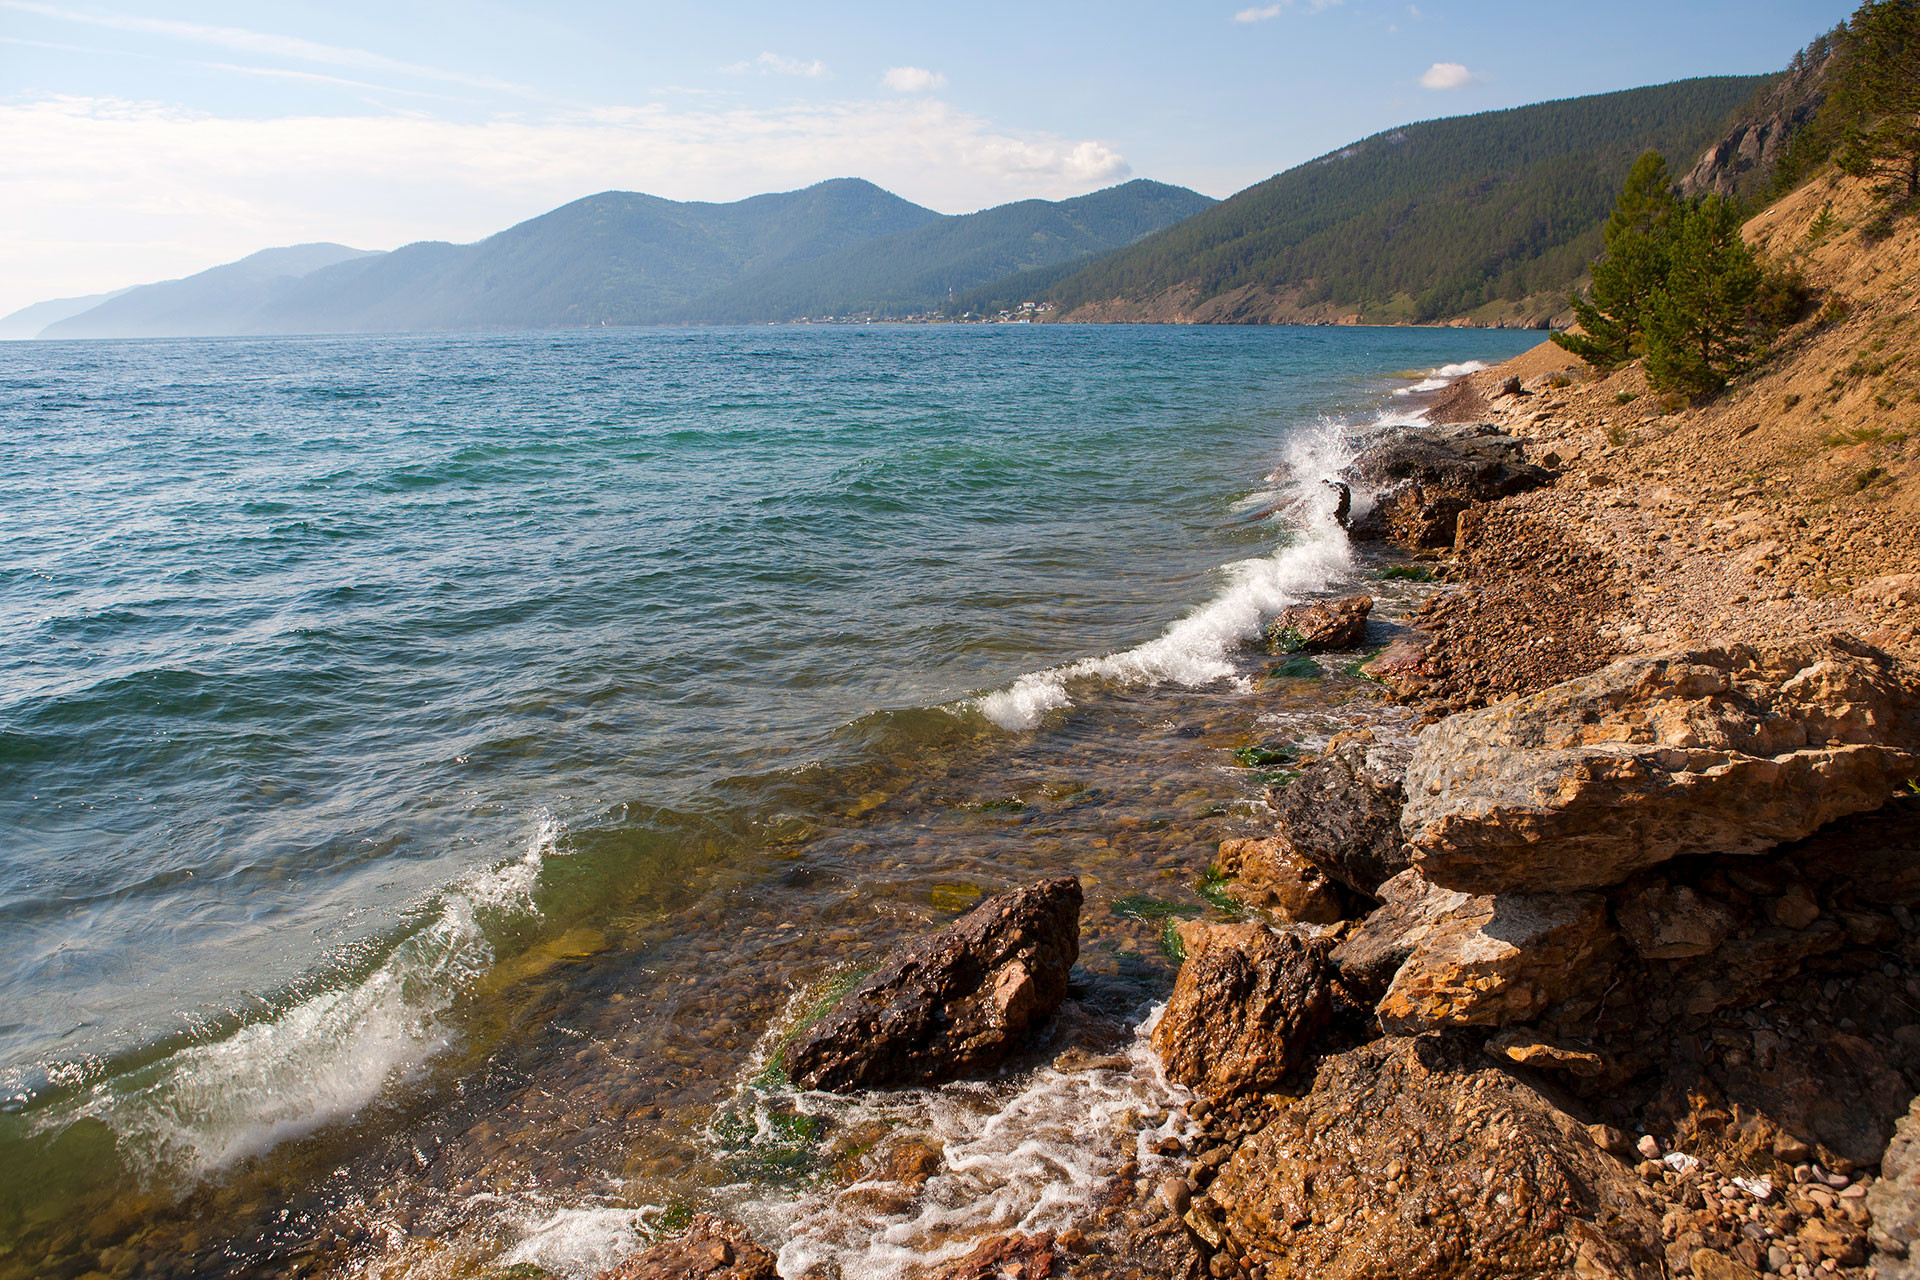 Baikal is the world’s largest freshwater lake by volume, so it's definitely worth seeing before you die